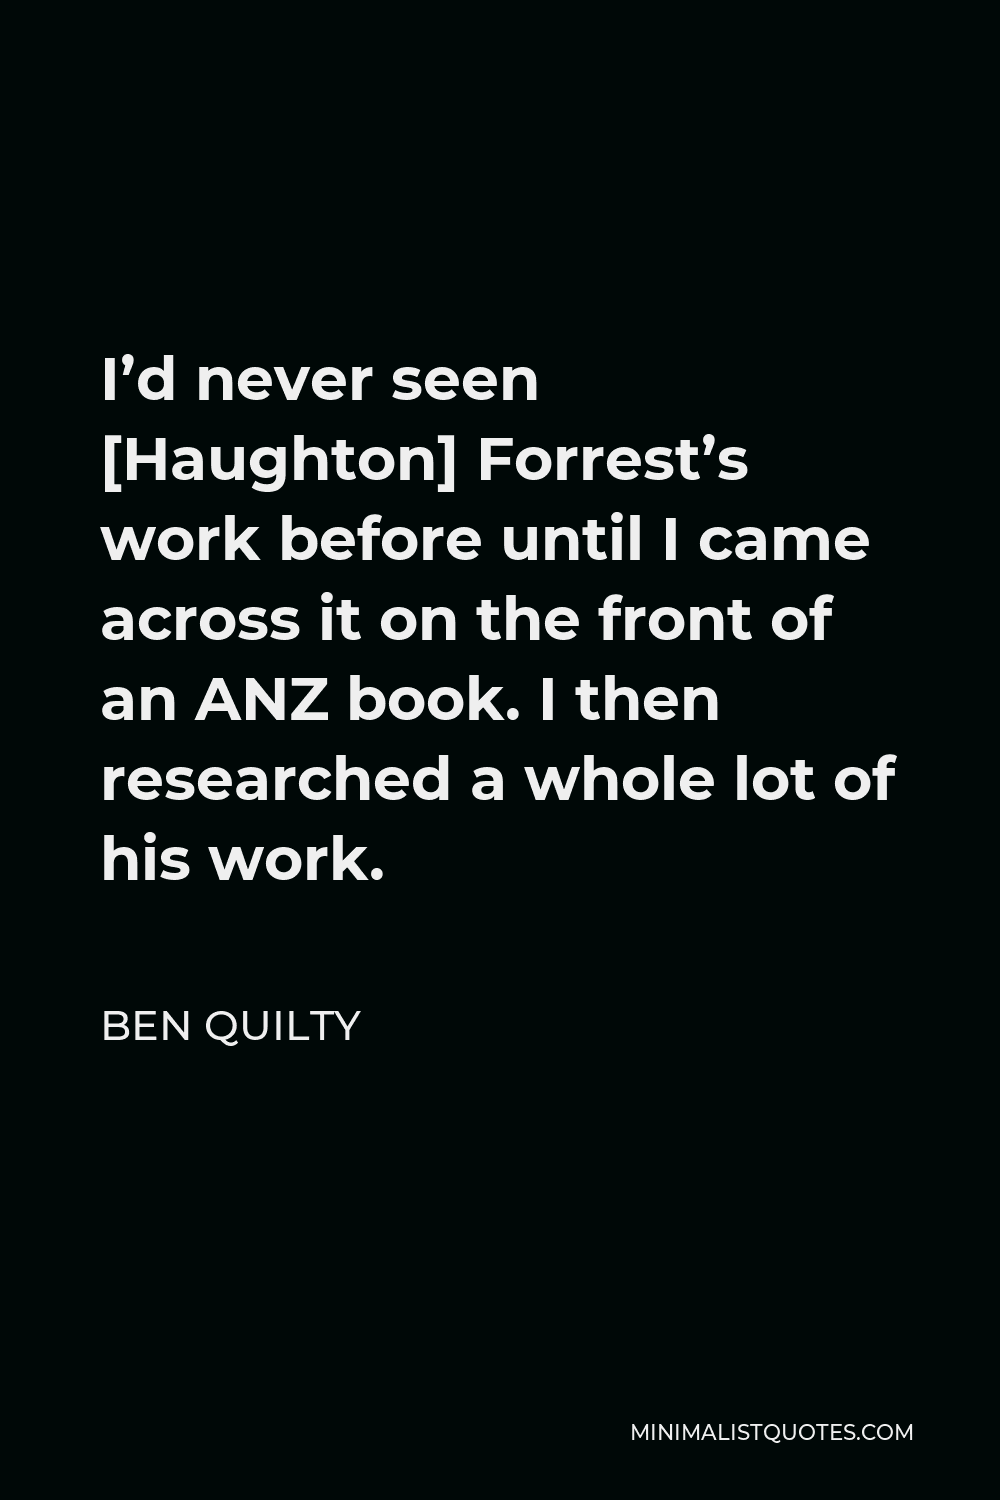 Ben Quilty Quote - I’d never seen [Haughton] Forrest’s work before until I came across it on the front of an ANZ book. I then researched a whole lot of his work.